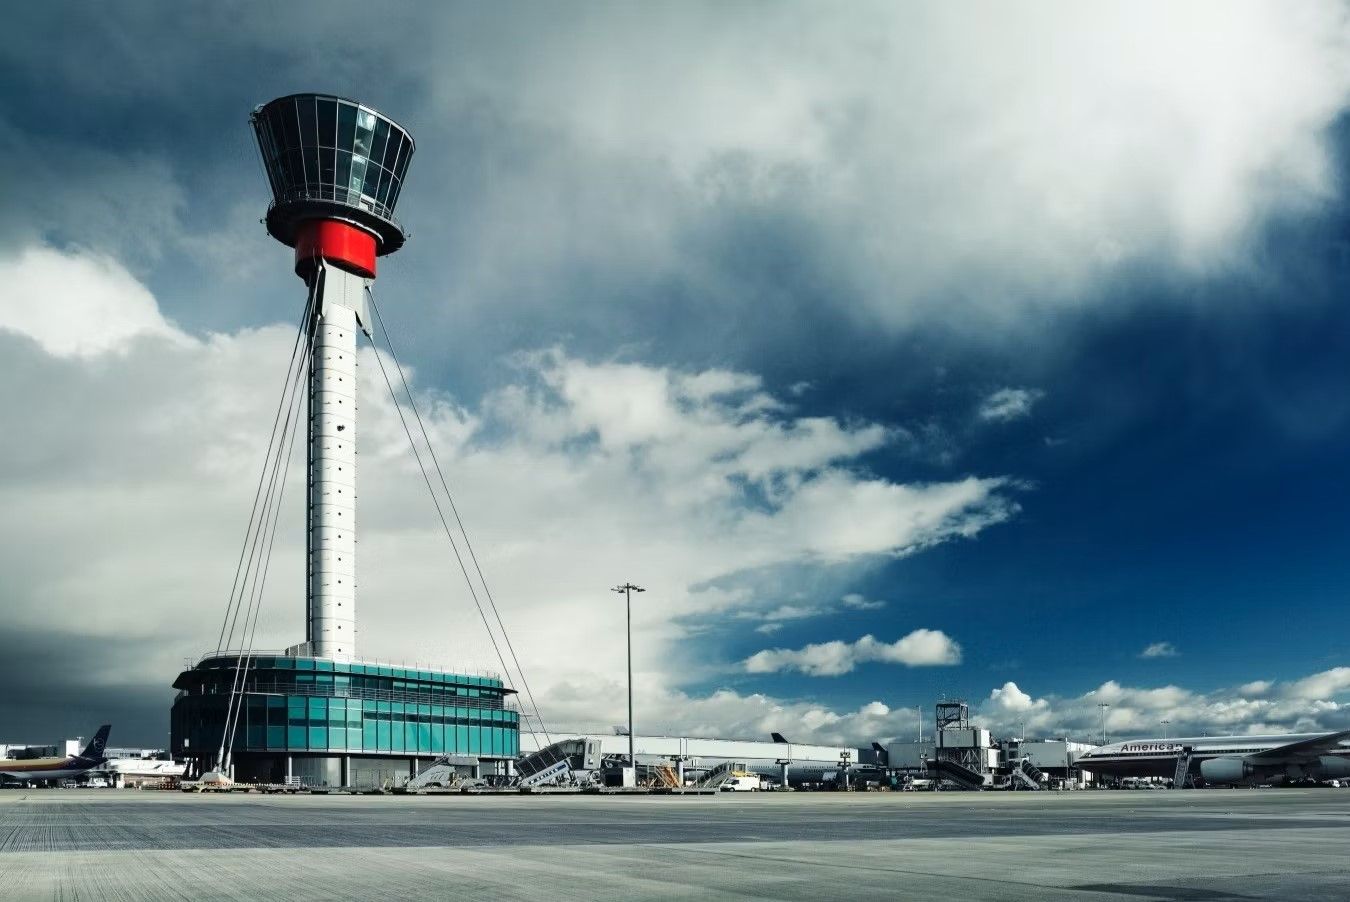 A panoramic photo of the apron and ATC tower at London Heathrow Airport.